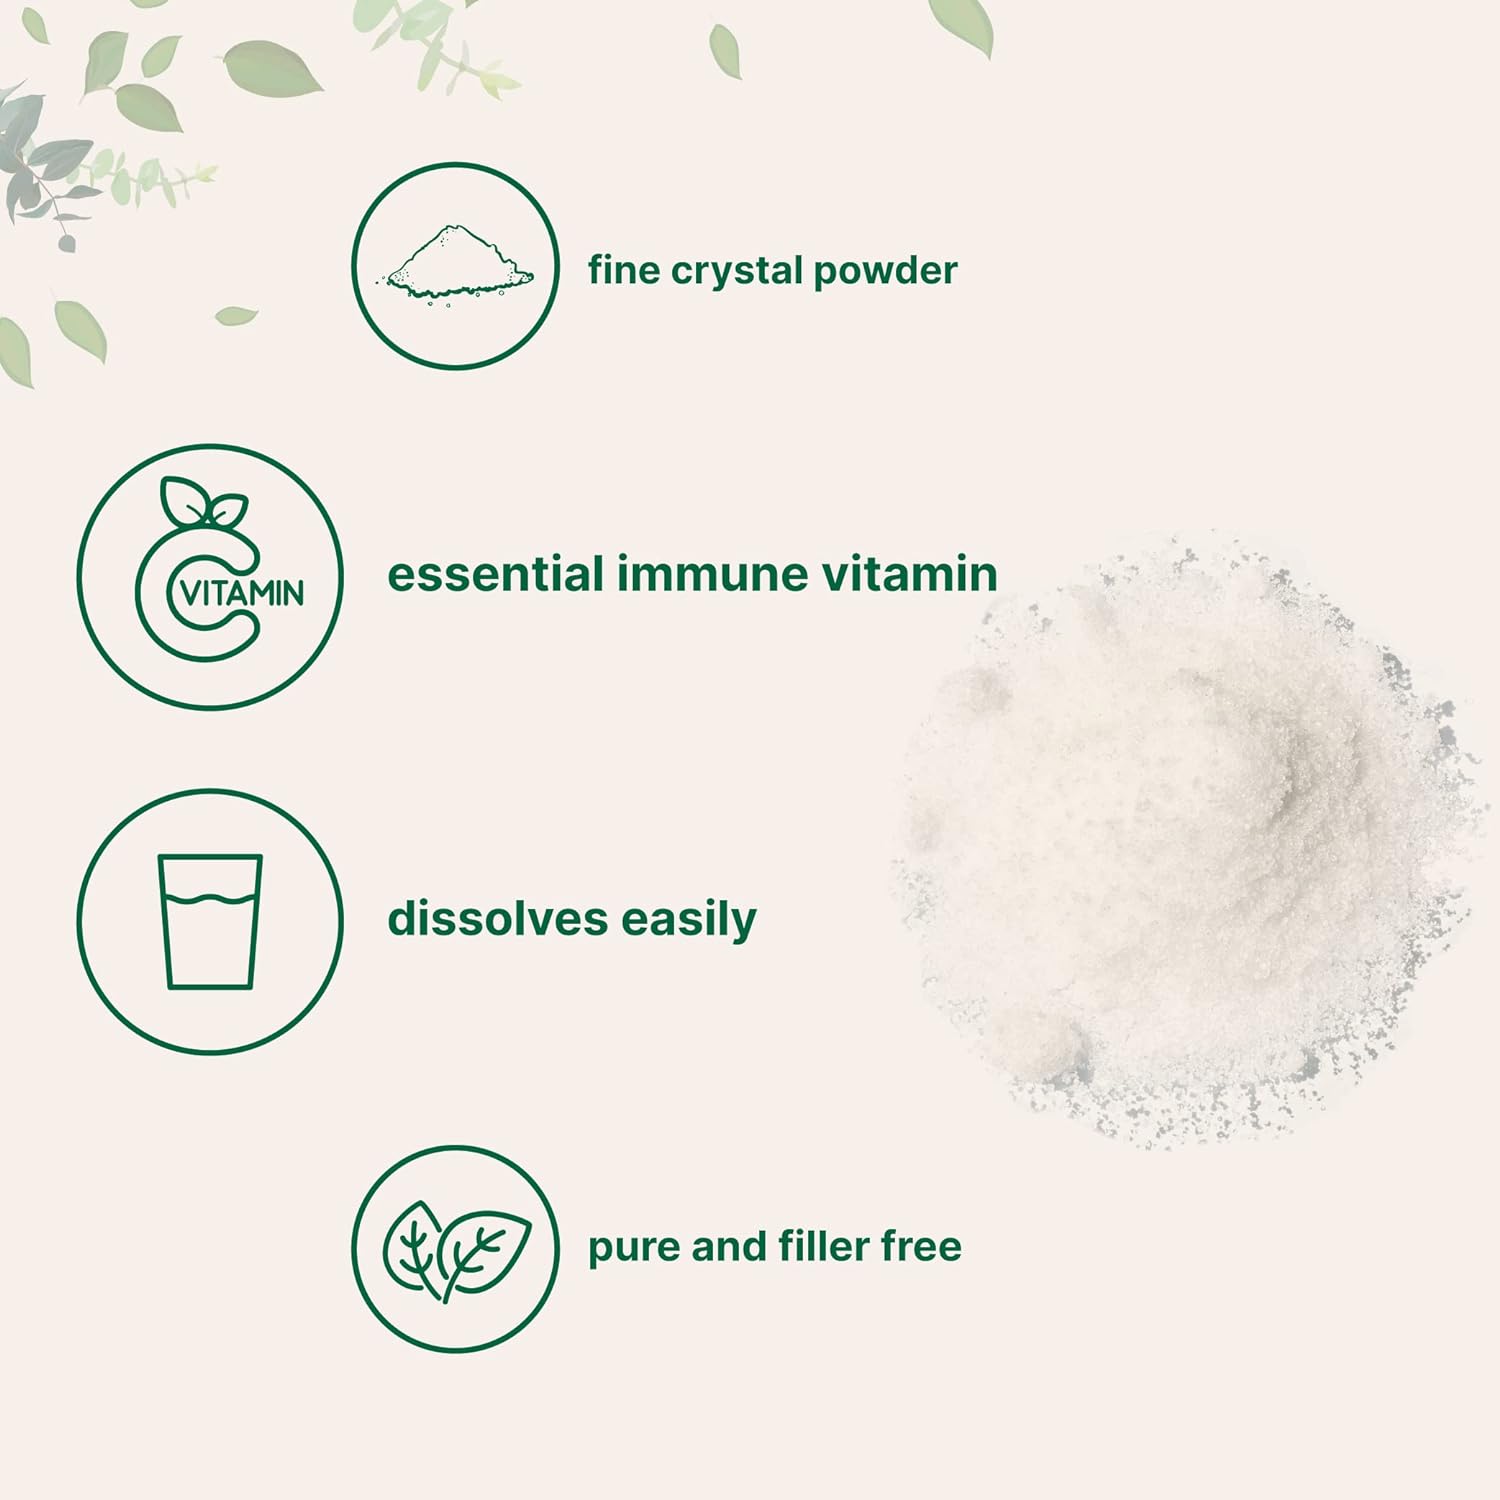 Micro Ingredients Pure Vitamin C Crystal Powder (Water Soluble Vitamin C 1000mg Per Serving), 1 KG (2.2 Pounds), Immune Vitamins and Strong Antioxidant, Pure Ascorbic Acid Powder Supplement